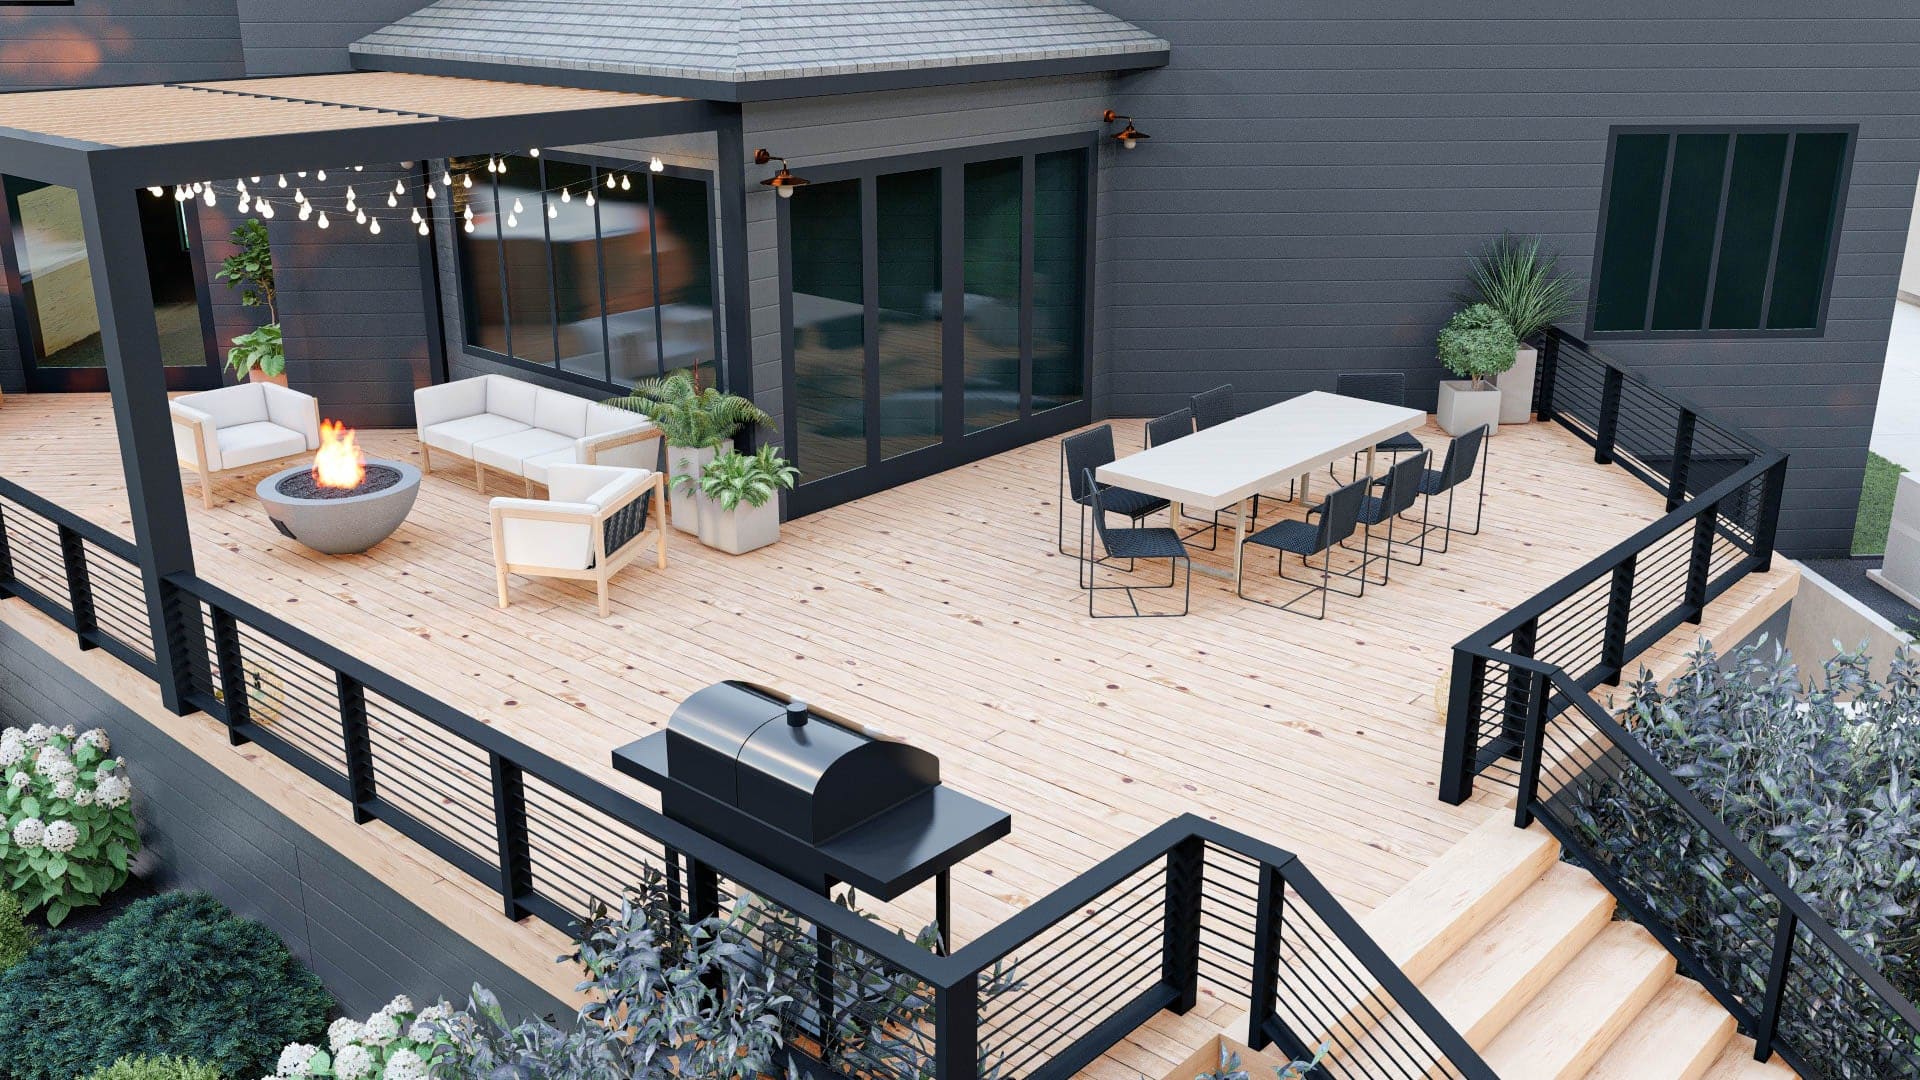 3D design render of entire deck with modern black railing, dining set, and fire pit lounge area